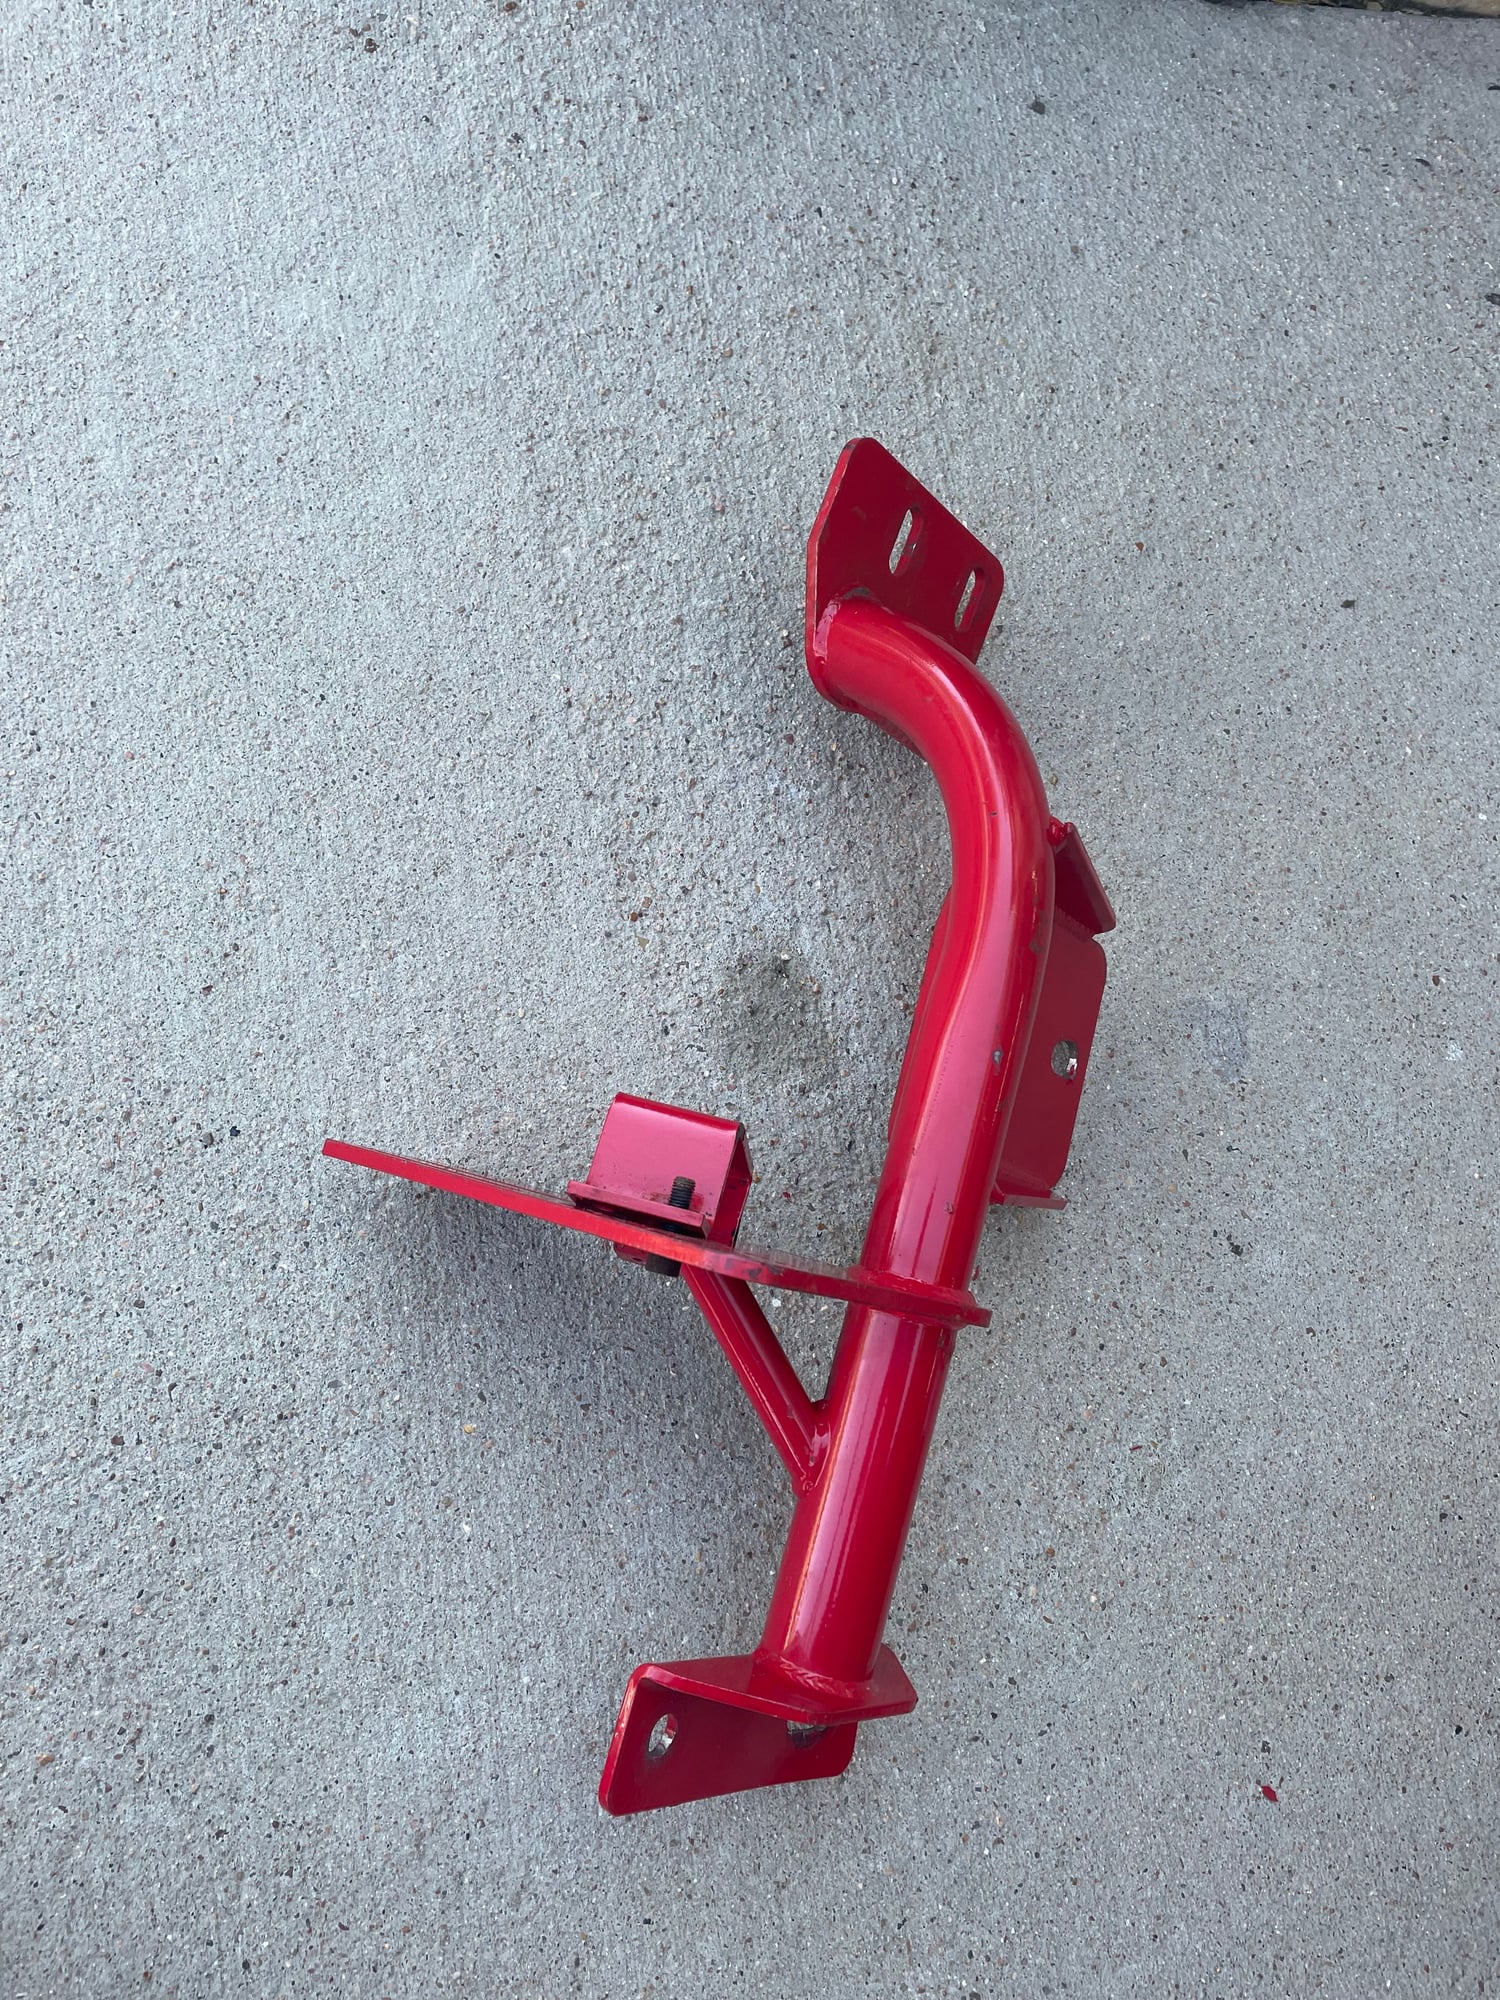 Miscellaneous - BMR TH350 or Powerglide Fbody crossmember and torque arm  relocation - Used - 1993 to 2002 Any Make All Models - Richmond, TX 77406, United States